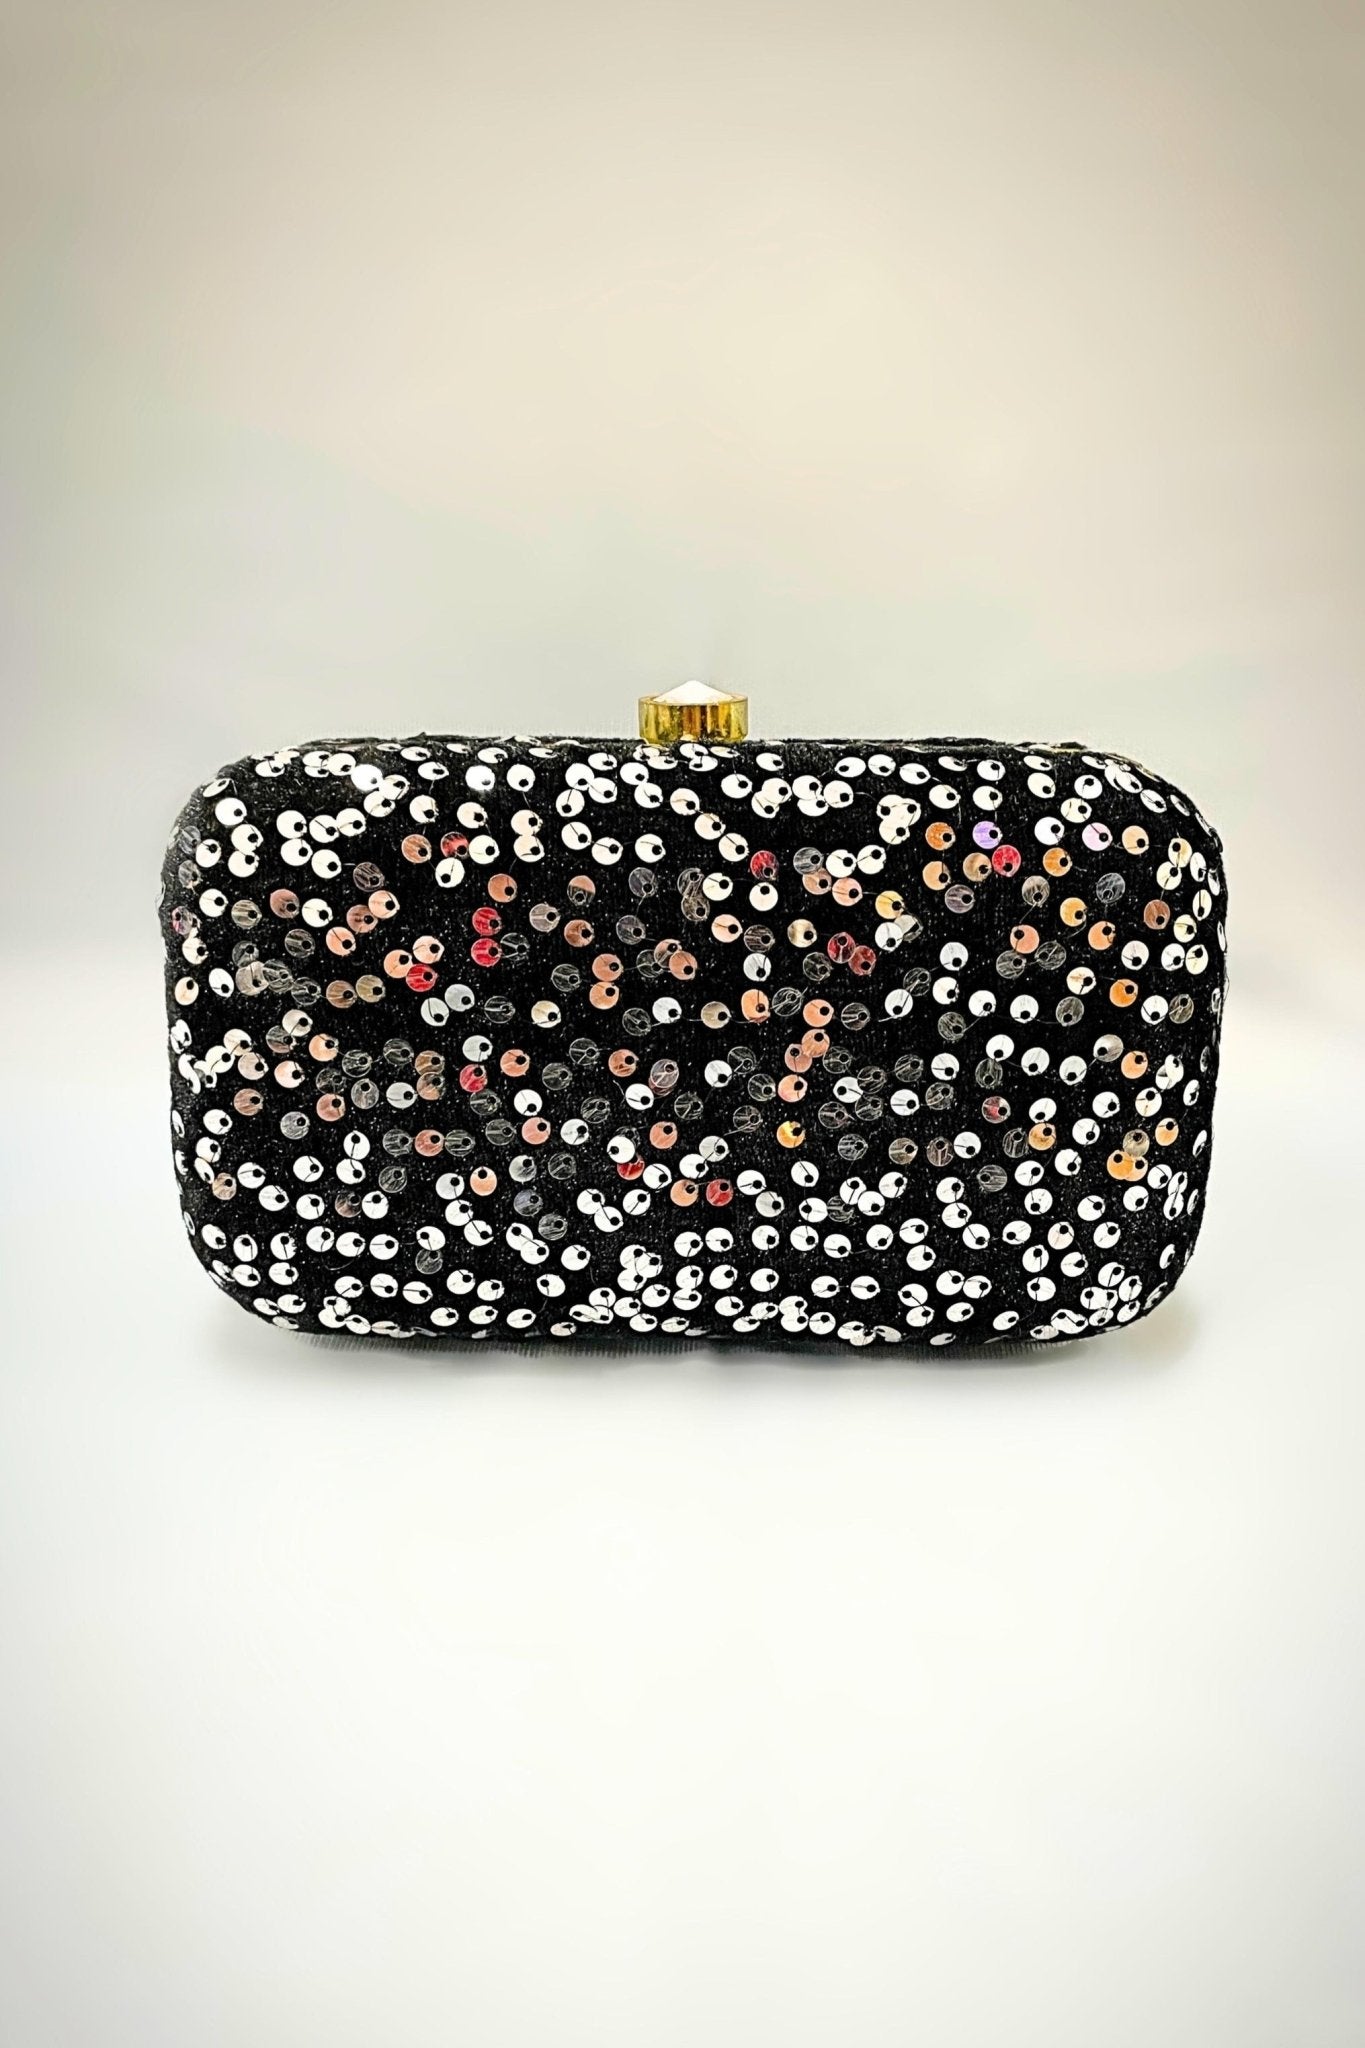 Set of 4 - Sequin Coin Purse Bags - Black and Multi - 7228732 - TJC